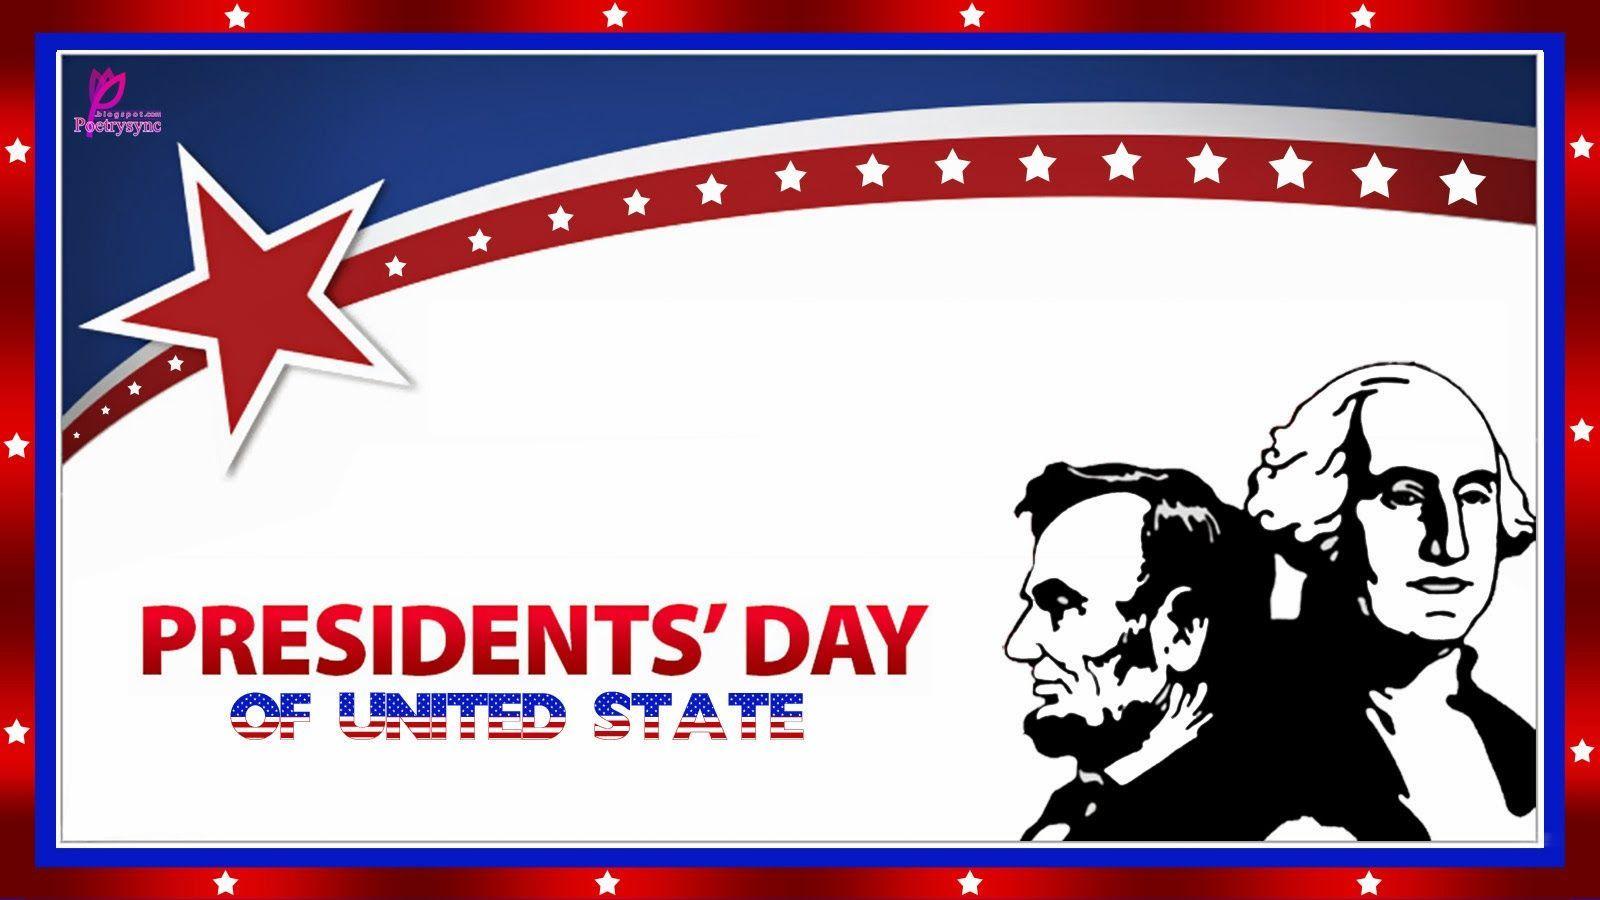 Presidents&Day Greeting Wallpaper and Wallpapers with Wishes Quotes